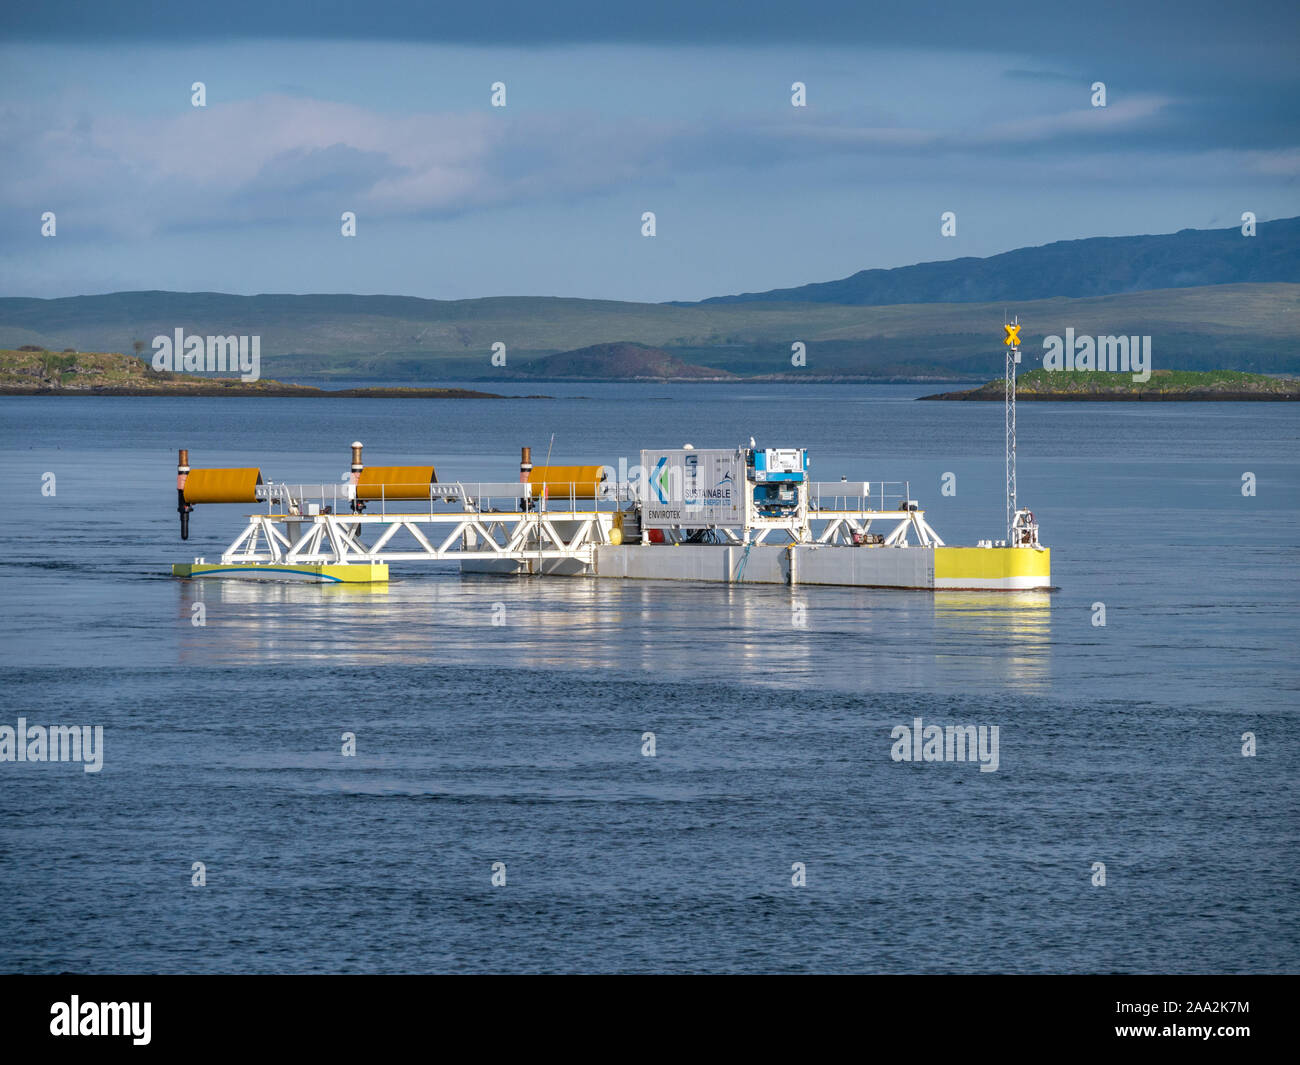 Underwater turbine electricity generation test platform owned by Sustainable Marine Energy Ltd in Loch Etive, Connel, Oban, Scotland, UK Stock Photo